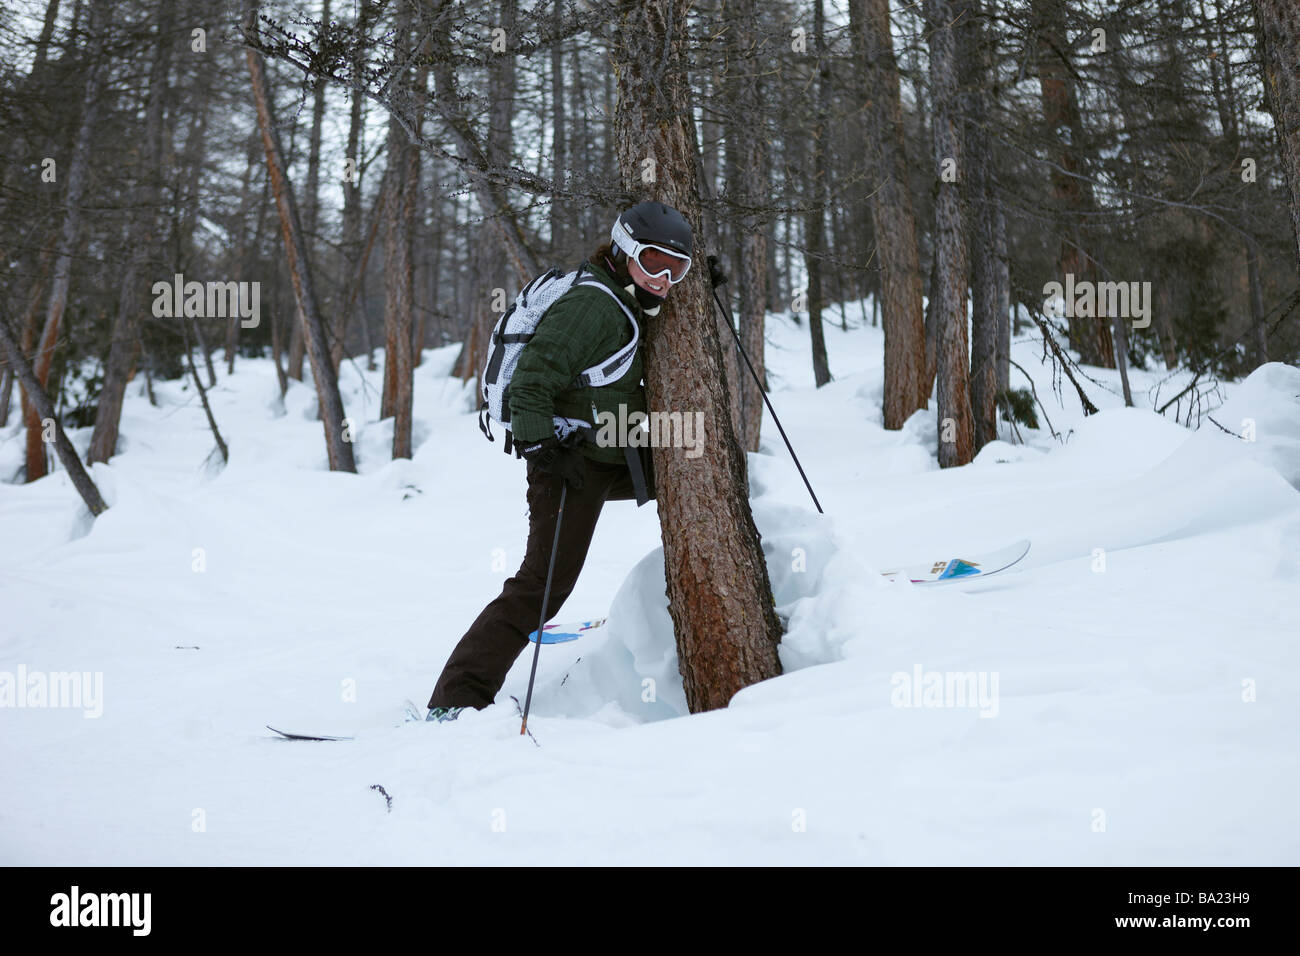 Ski Accident Tree High Resolution Stock Photography and Images - Alamy